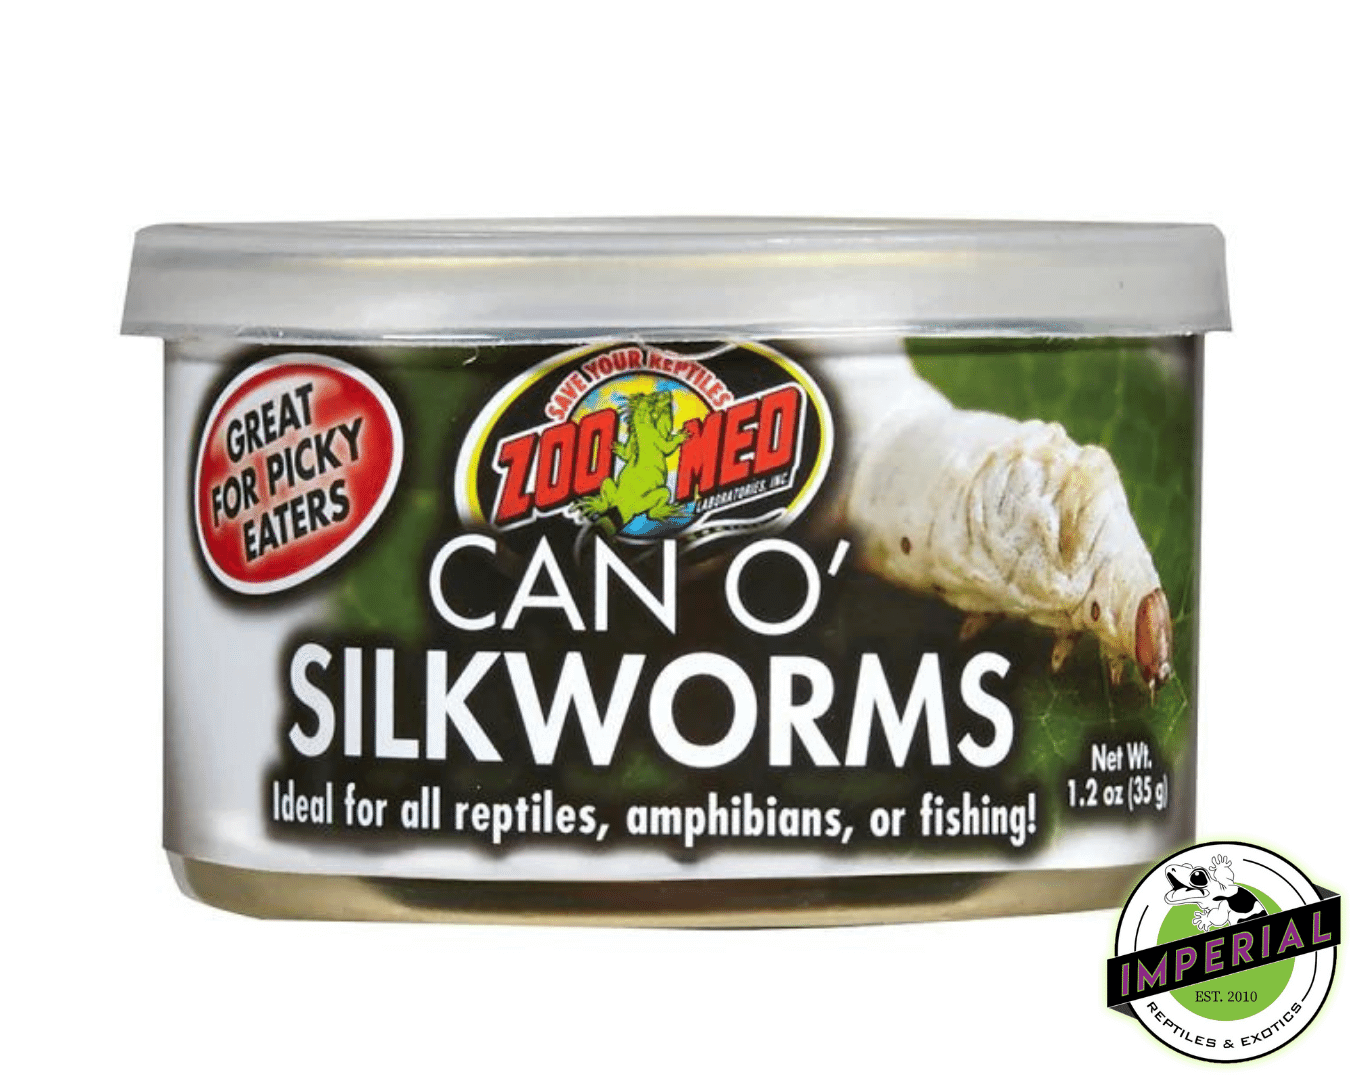 Buy canned silkworms for sale online at cheap prices.